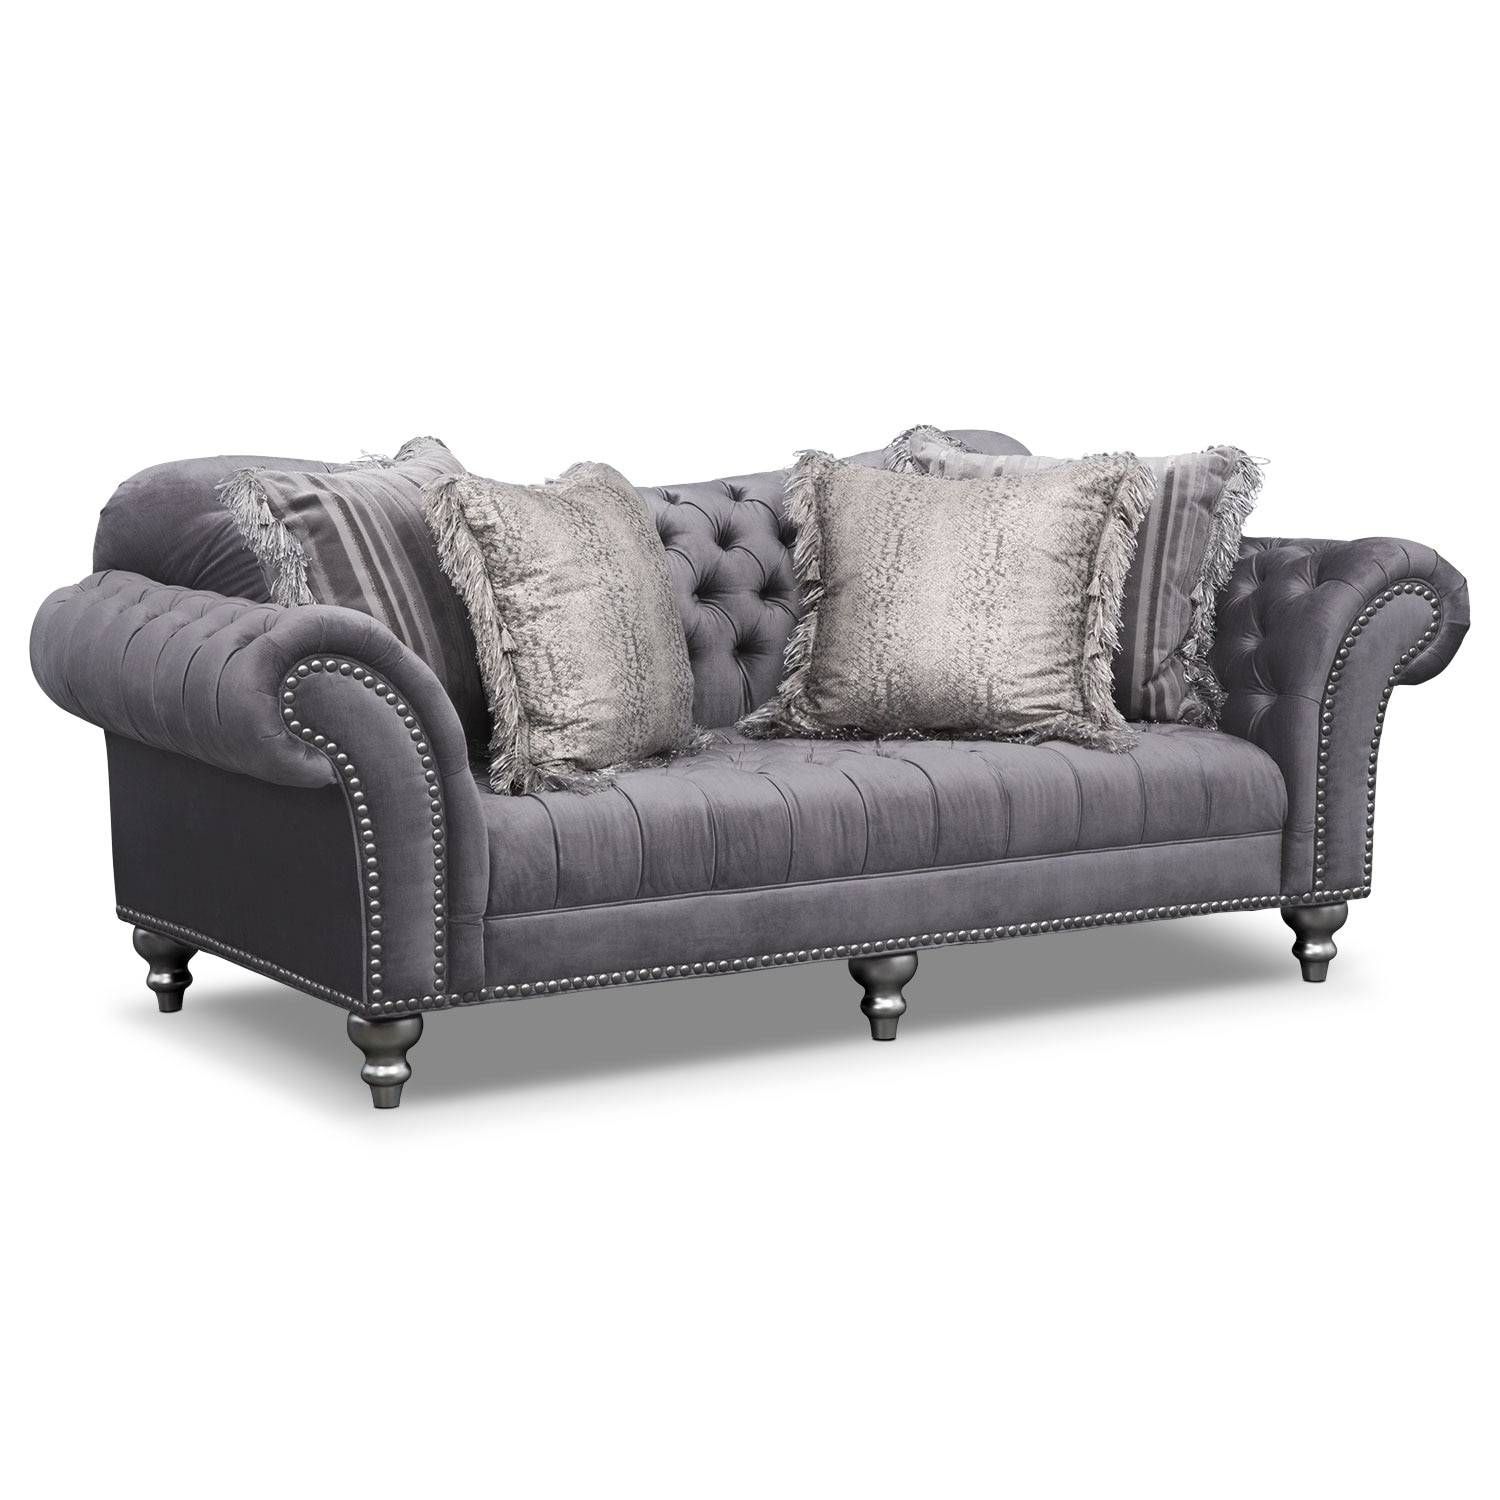 Brittney Sofa And Chair Set – Gray | American Signature Furniture Regarding Sofa And Chair Set (View 24 of 30)